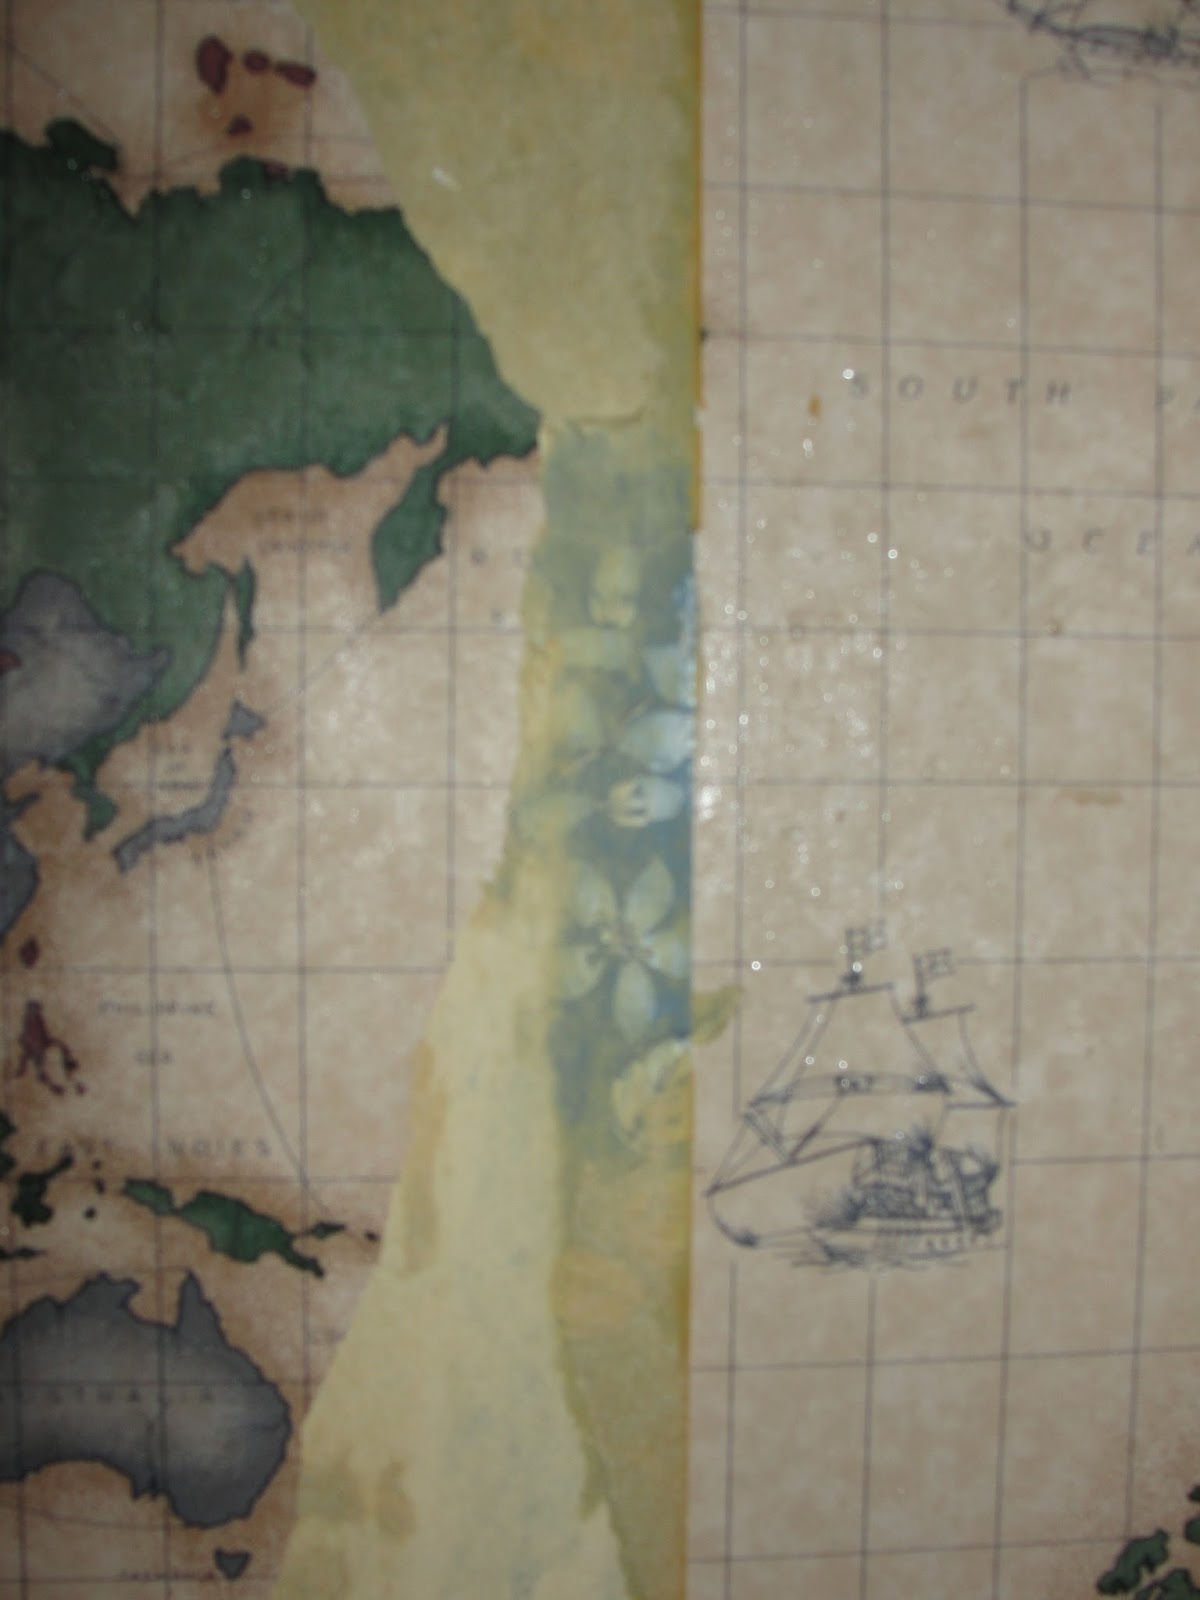 underneath the old world map wallpaper was another lovely wallpaper